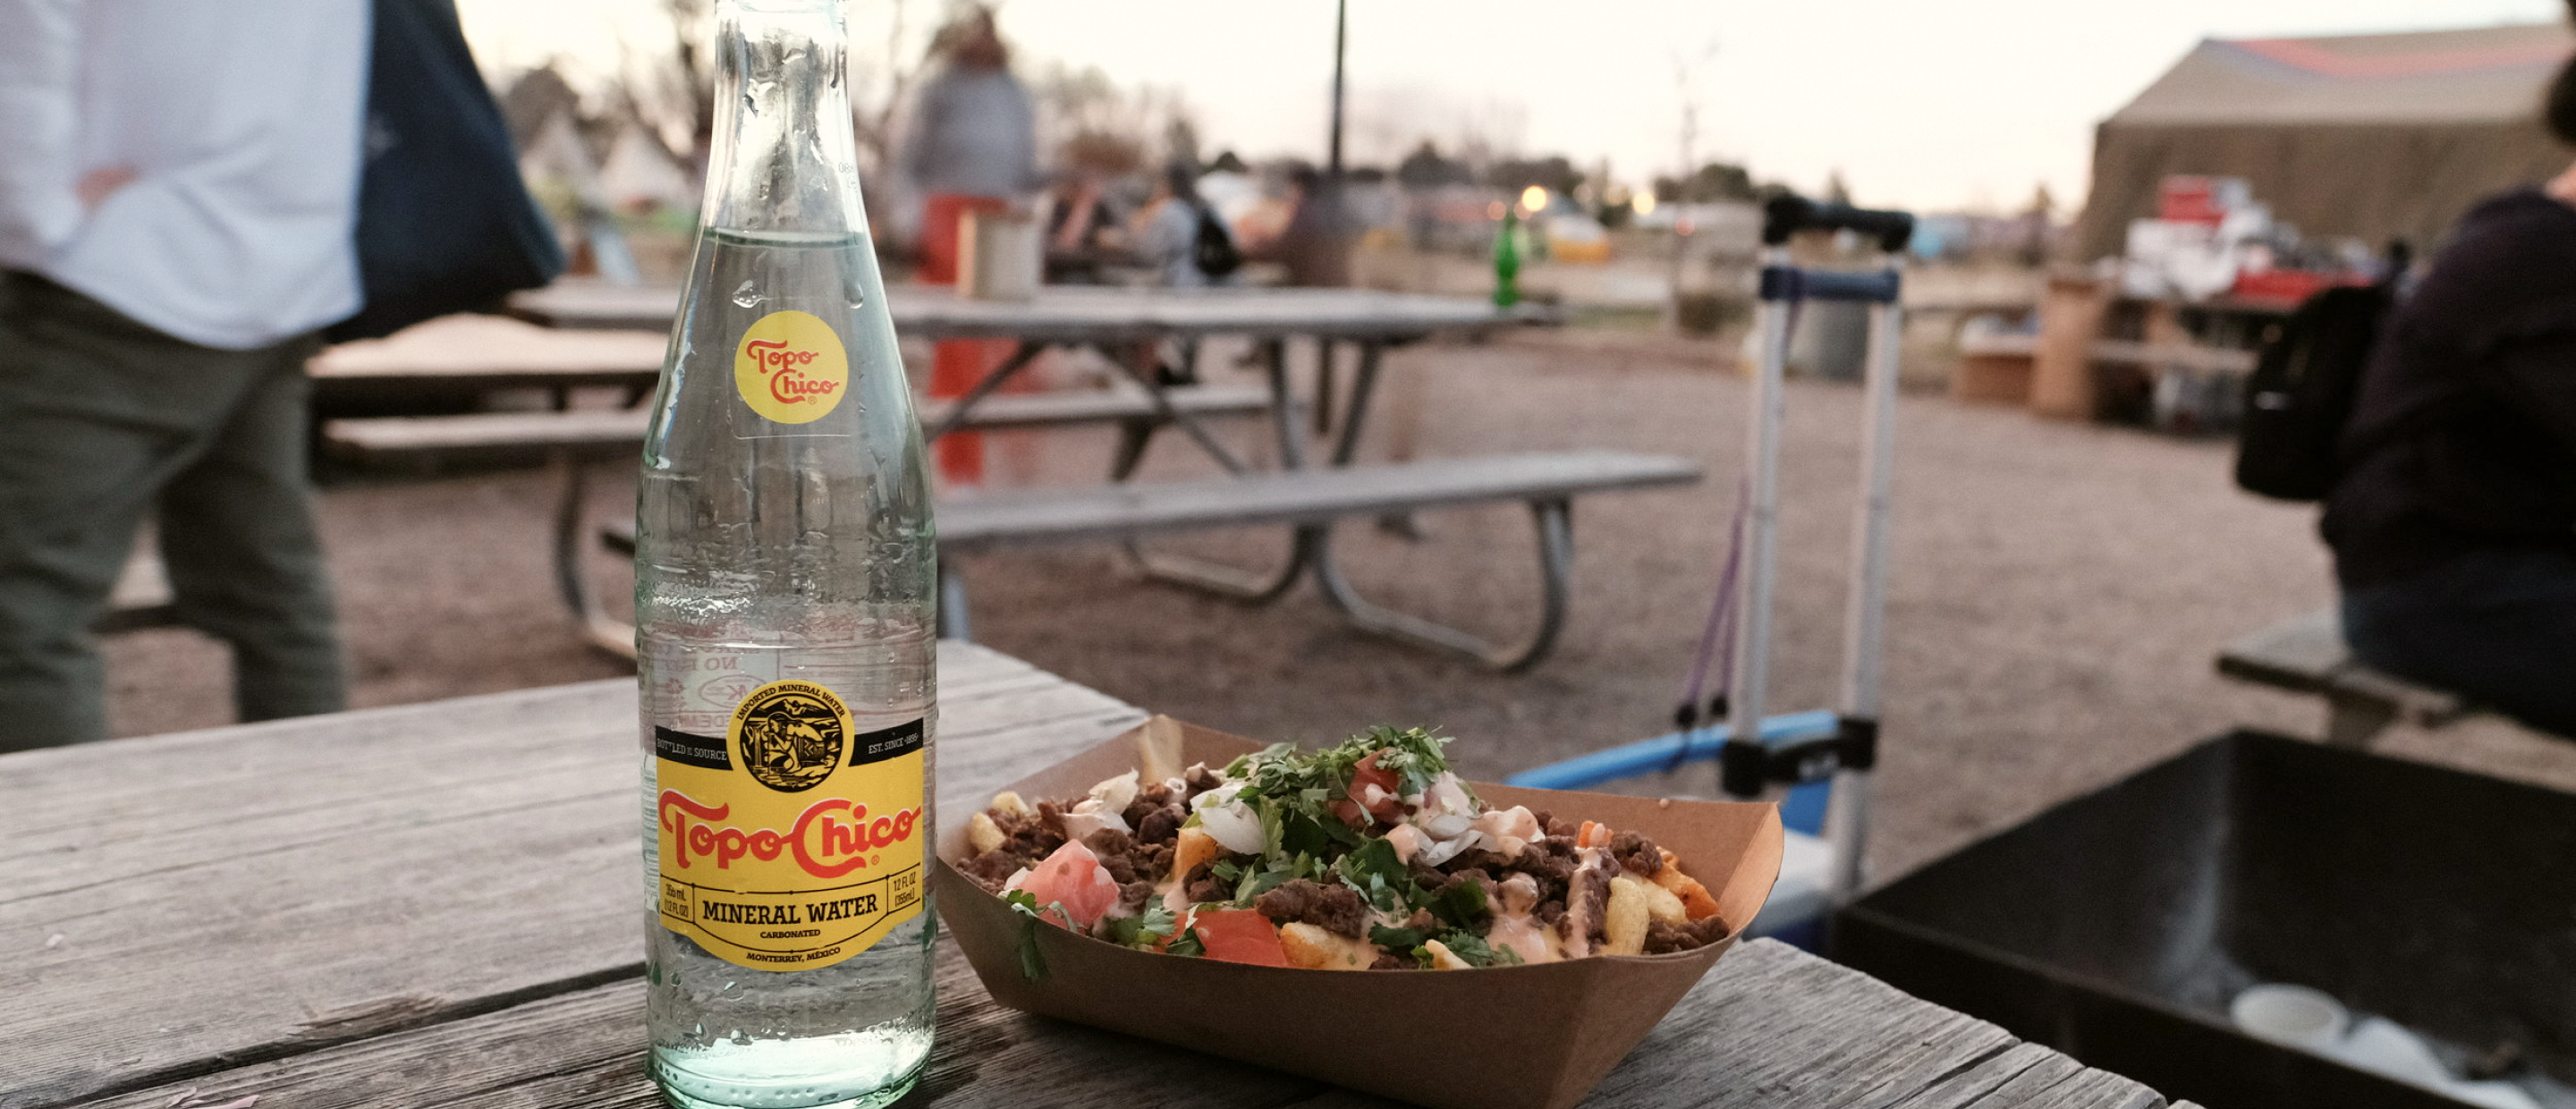 topo chico and a meal